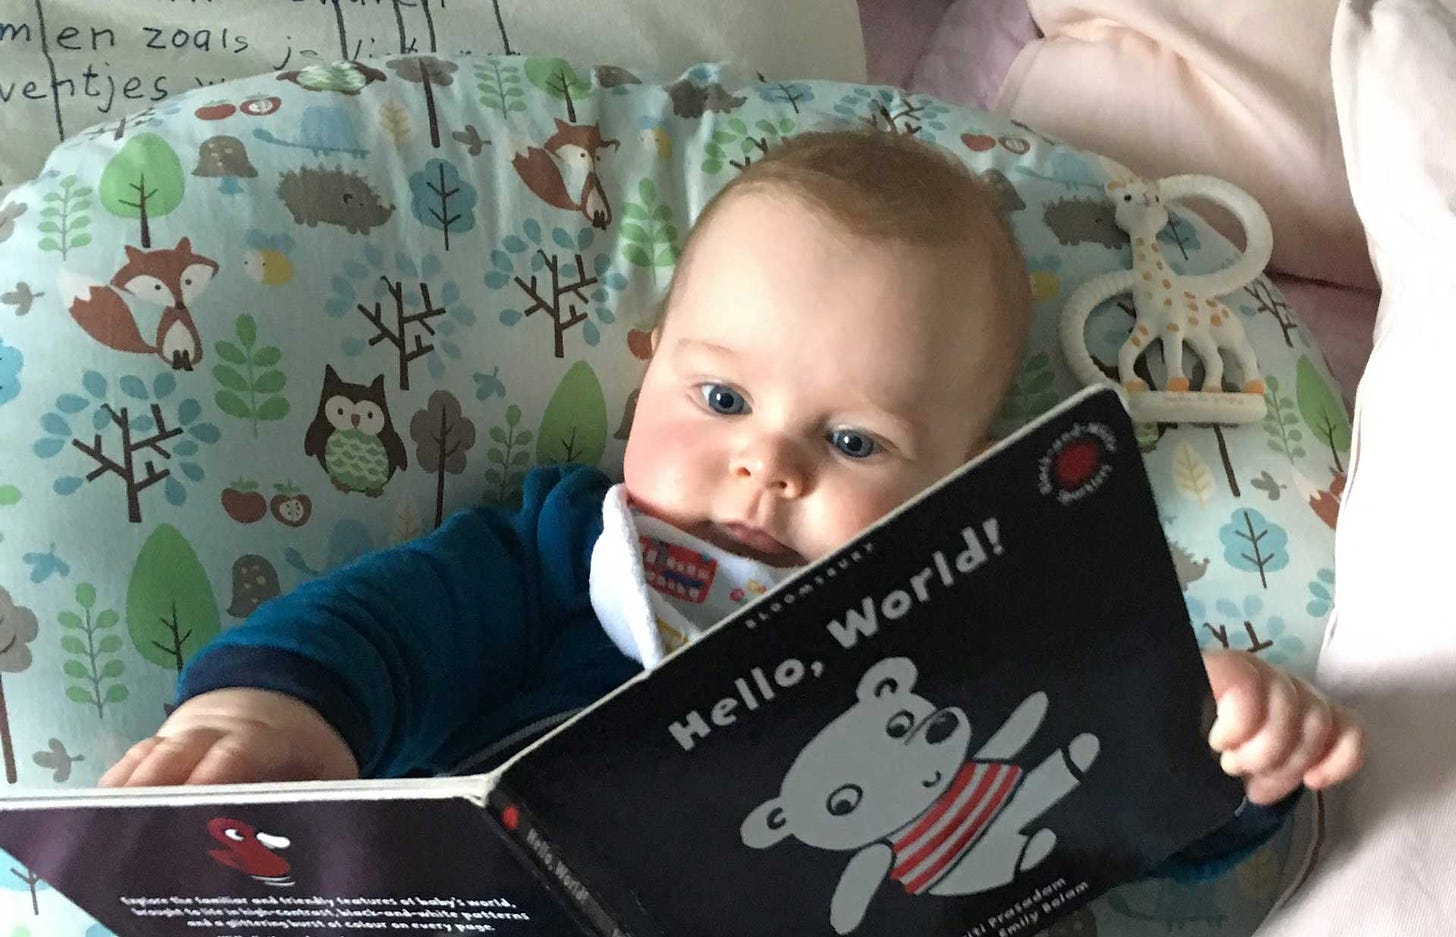 A baby looks at a baby book